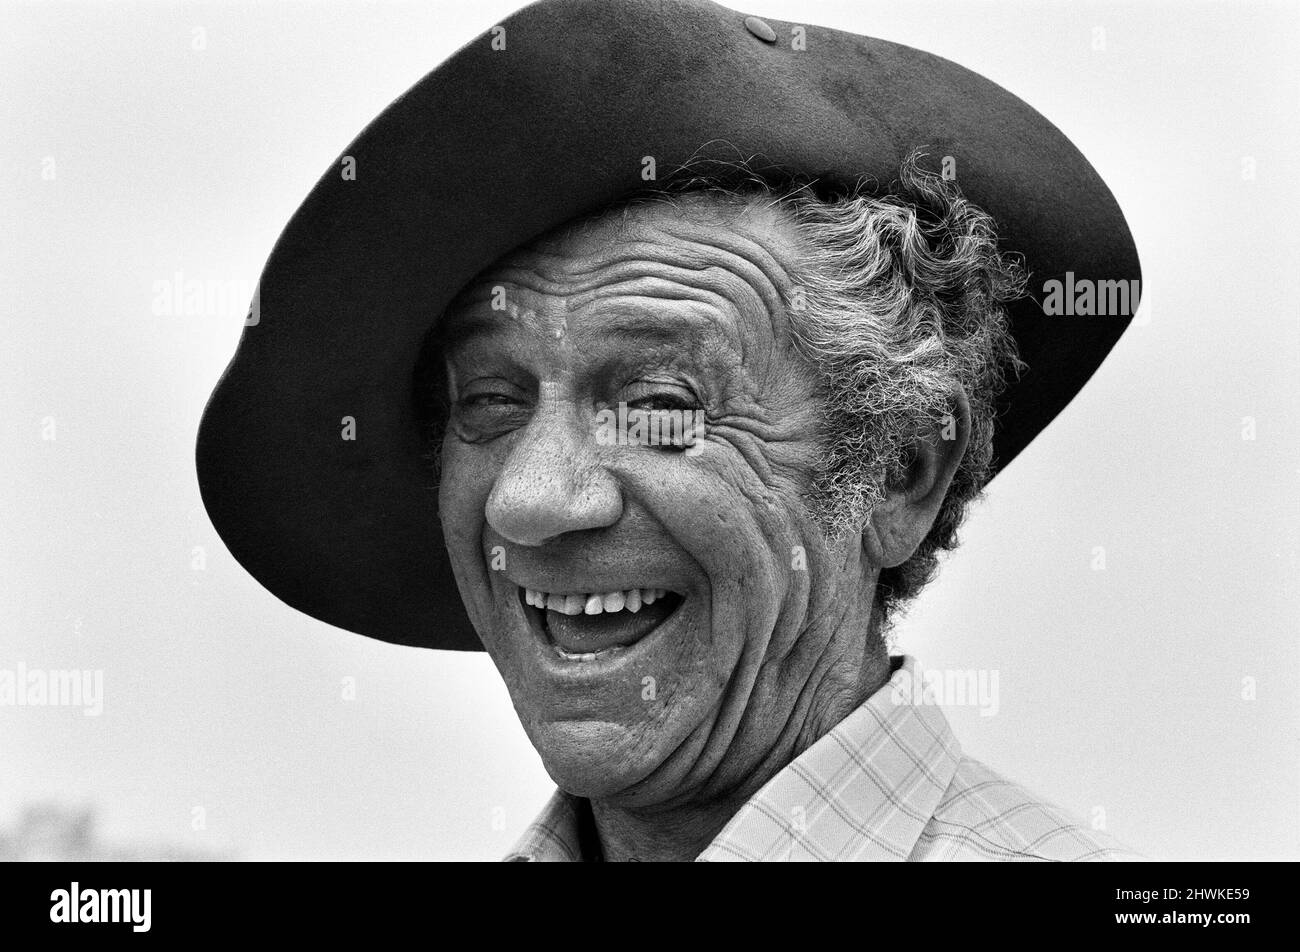 Sid James, 'Carry On' actor and star of the Thames television situation comedy show Bless This House, wearing an Australian style bush hat ahead of his visit to Australia where he will star in a stage farce called 'Marriage Fever'. Pictures taken 20th July 1972. Stock Photo